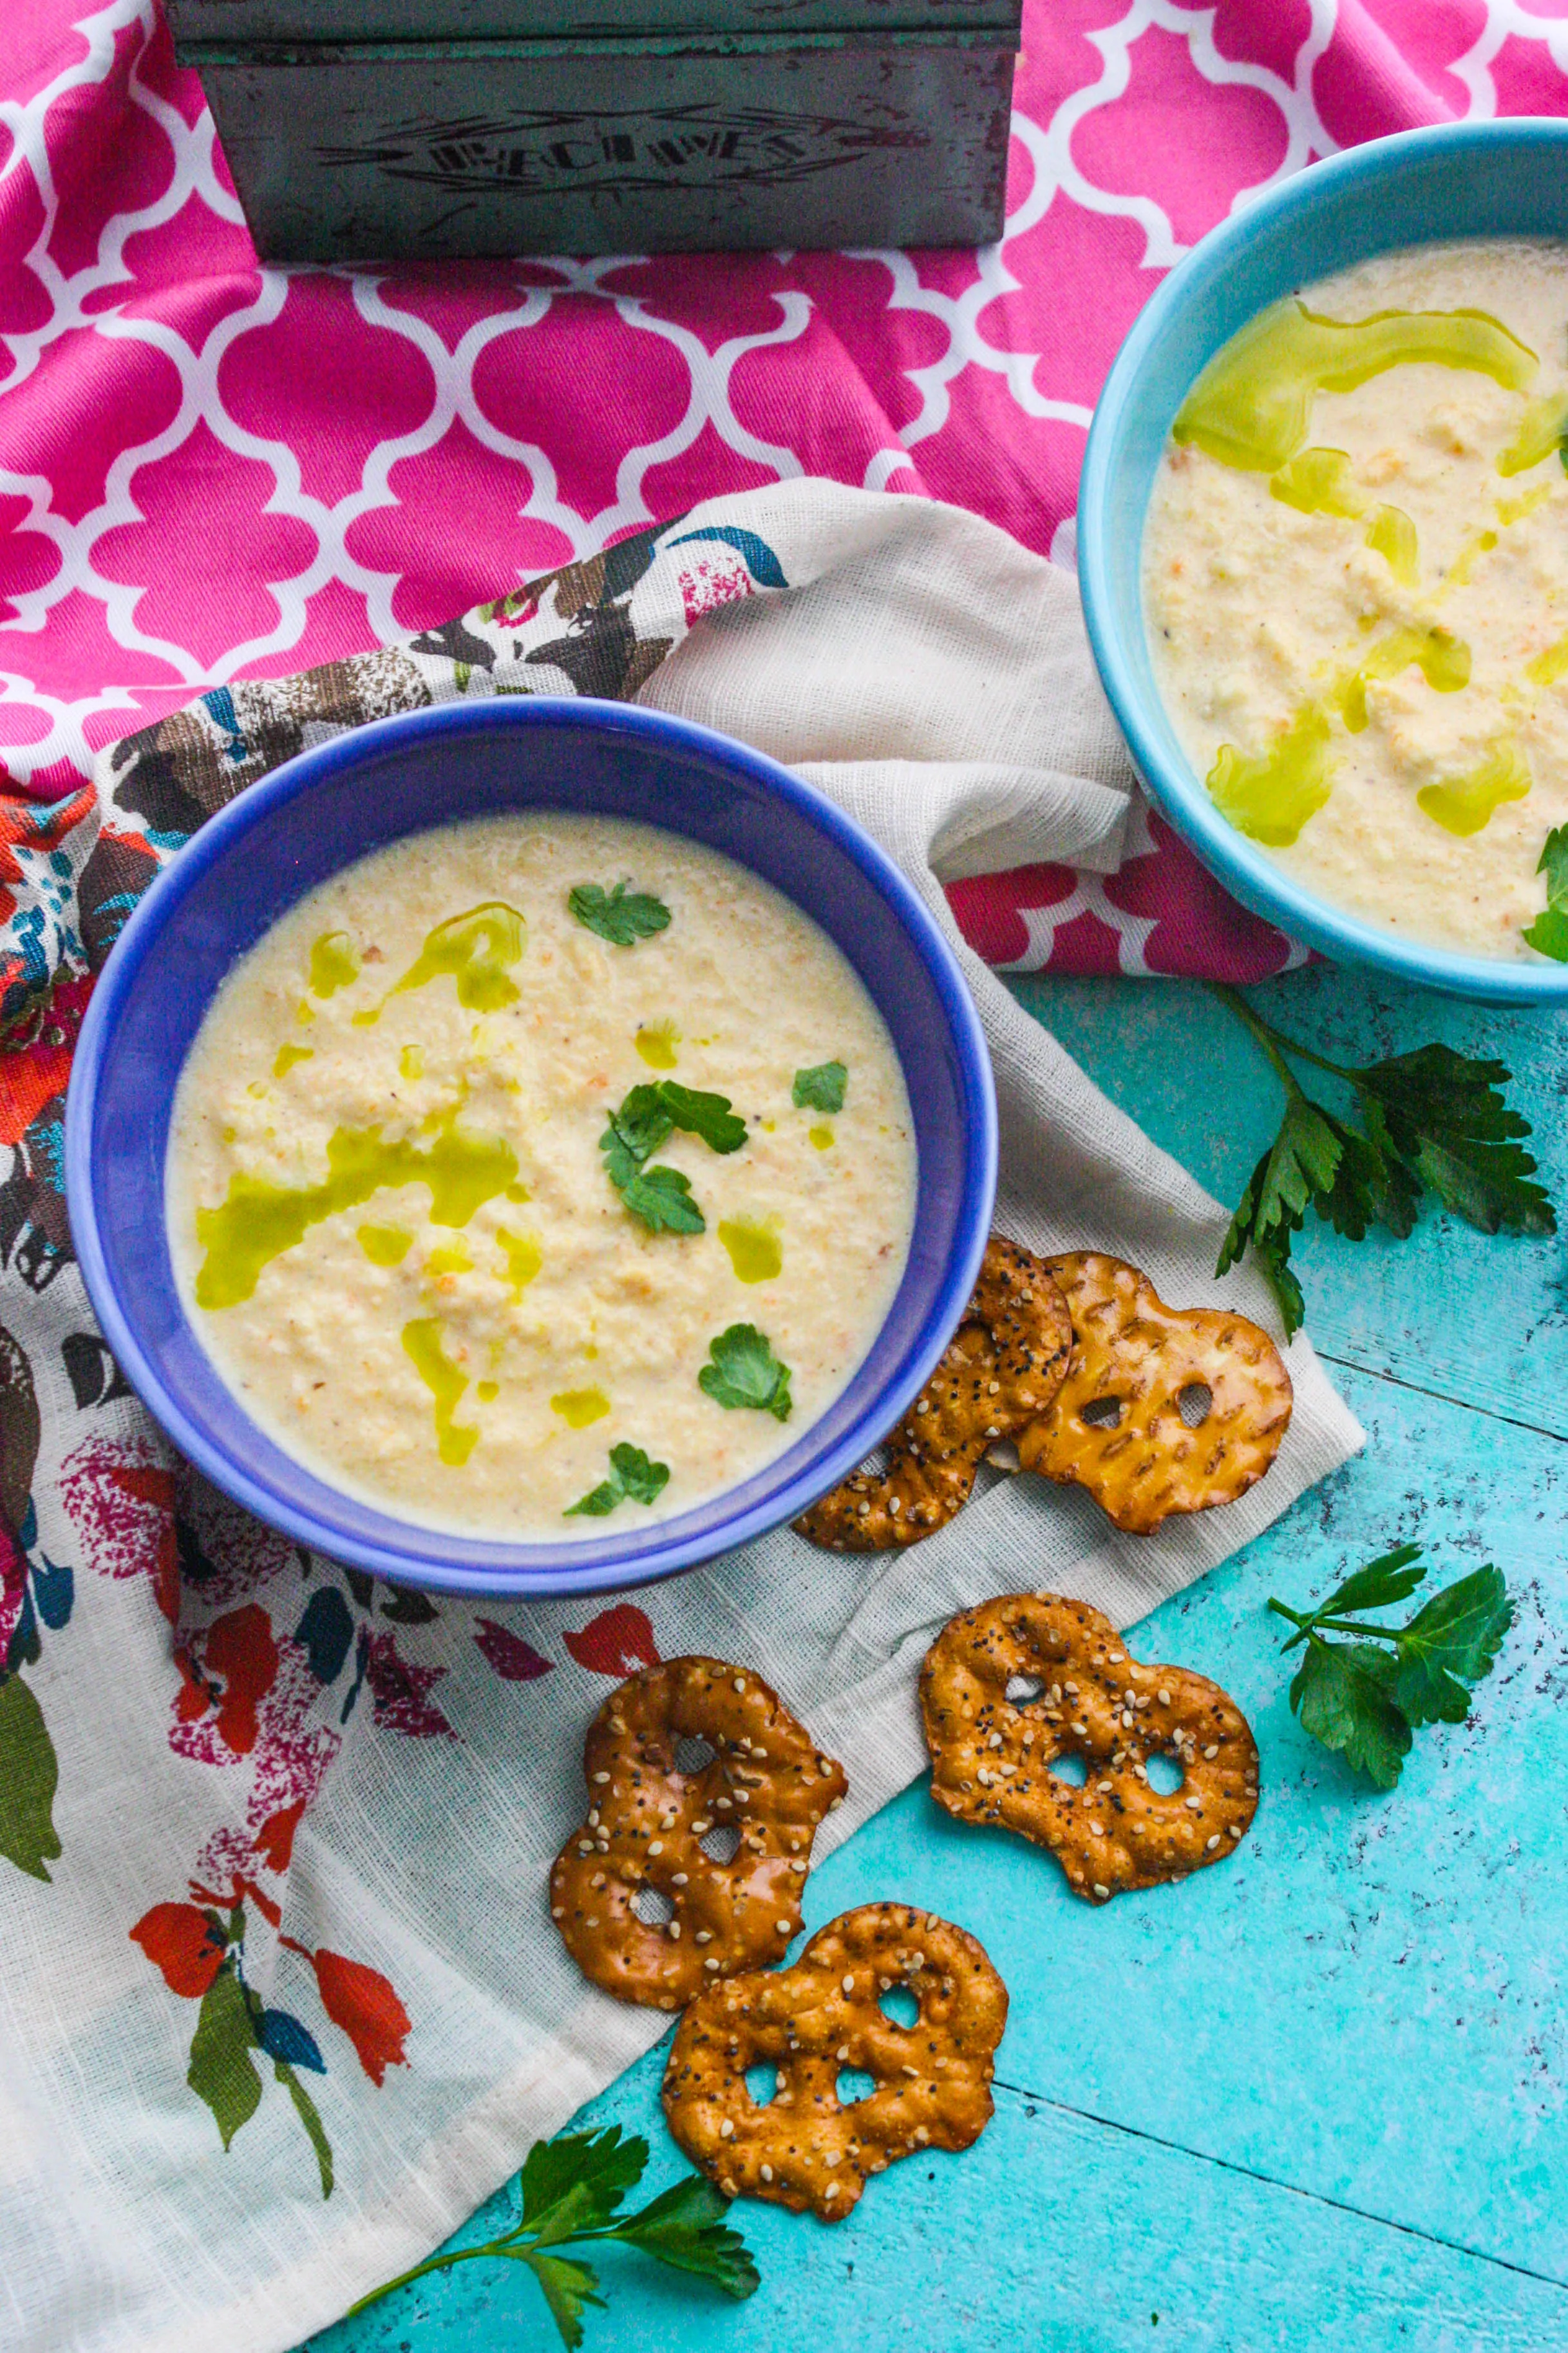 Creamy Roasted Cauliflower Soup with Parsley Oil is creamy and rich for a hearty dish. Dig in to this Creamy Roasted Cauliflower Soup with Parsley Oil!